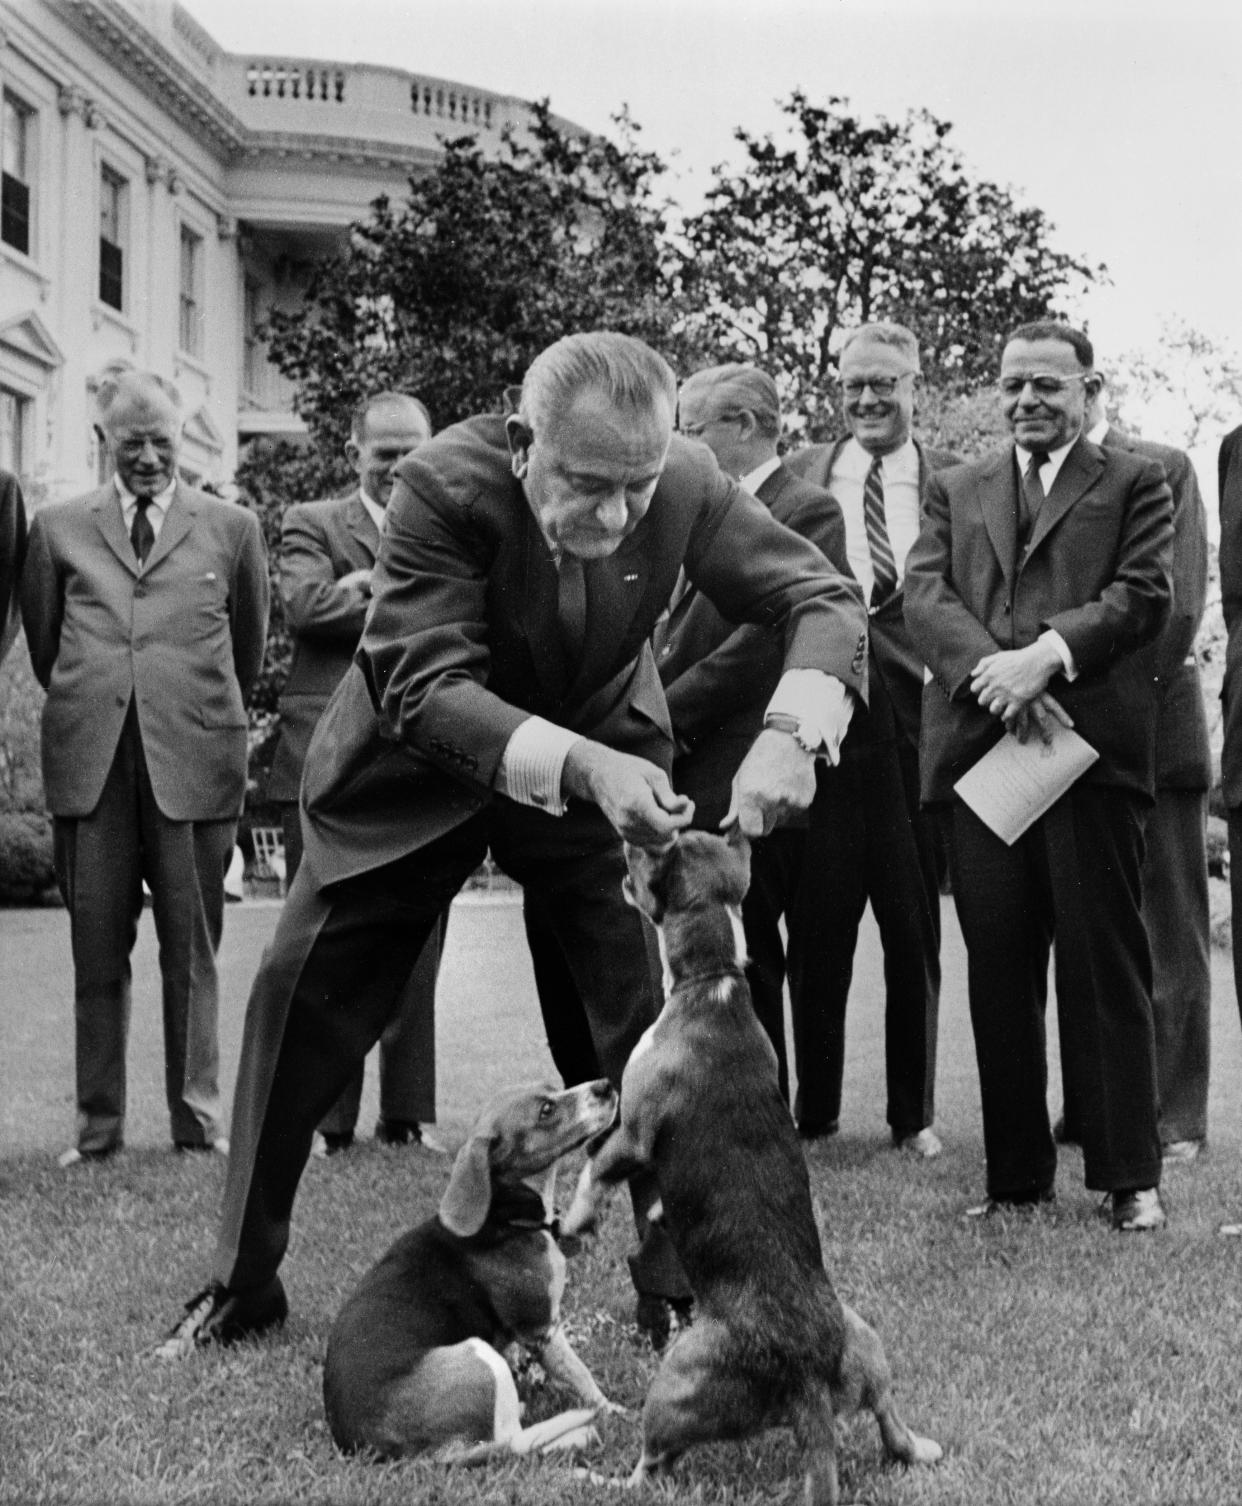 In this April 27, 1964, file photo  President Lyndon B. Johnson holds his dog "Her" by the ears as White House visitors look on the White House lawn, Washington. At left is President Johnson's other dog, "Him." This picture raised criticism from dog lovers. The arrival of the Biden pets will also mark the next chapter in a long history of pets residing at the White House after a four-year hiatus during the Trump administration. (AP Photo/Charles P. Gorry, File)